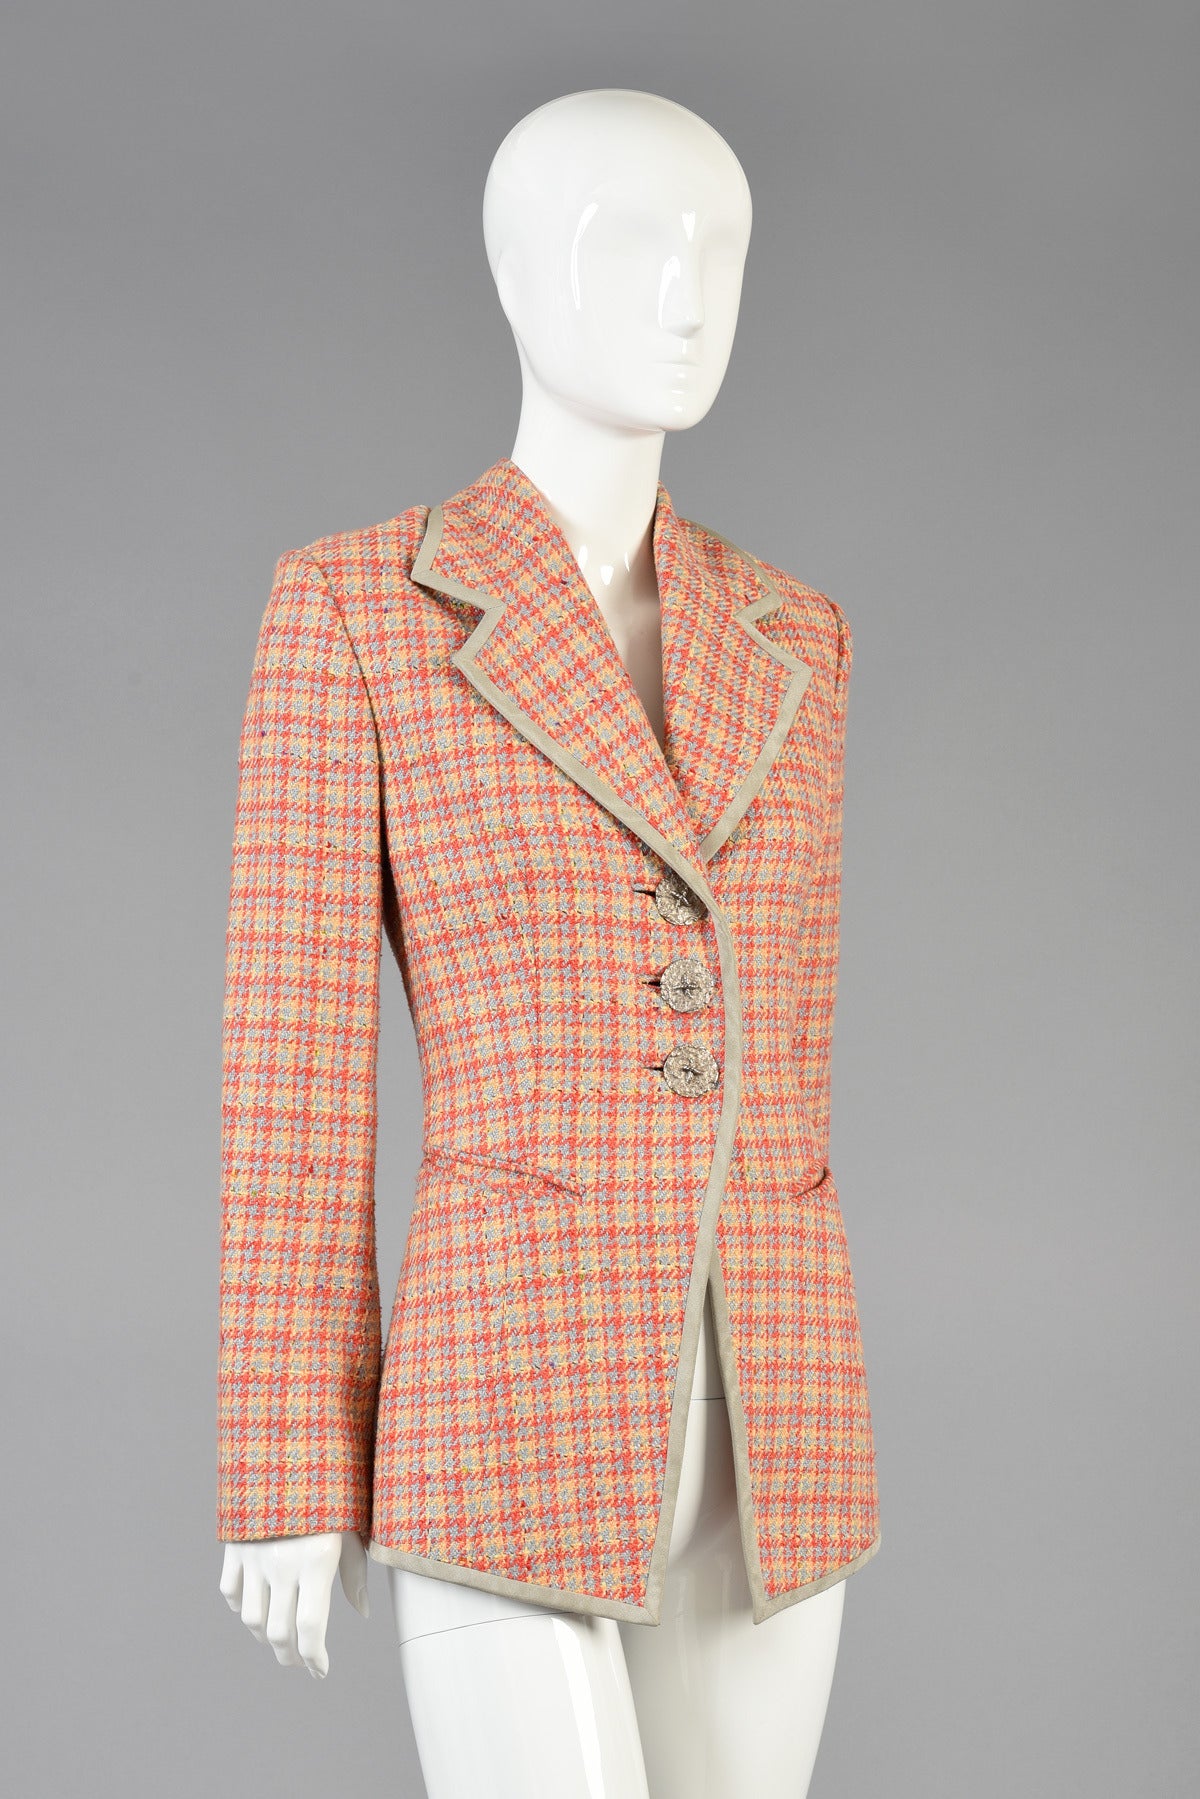 1990's Christian Dior Houndstooth Plaid Jacket For Sale 1